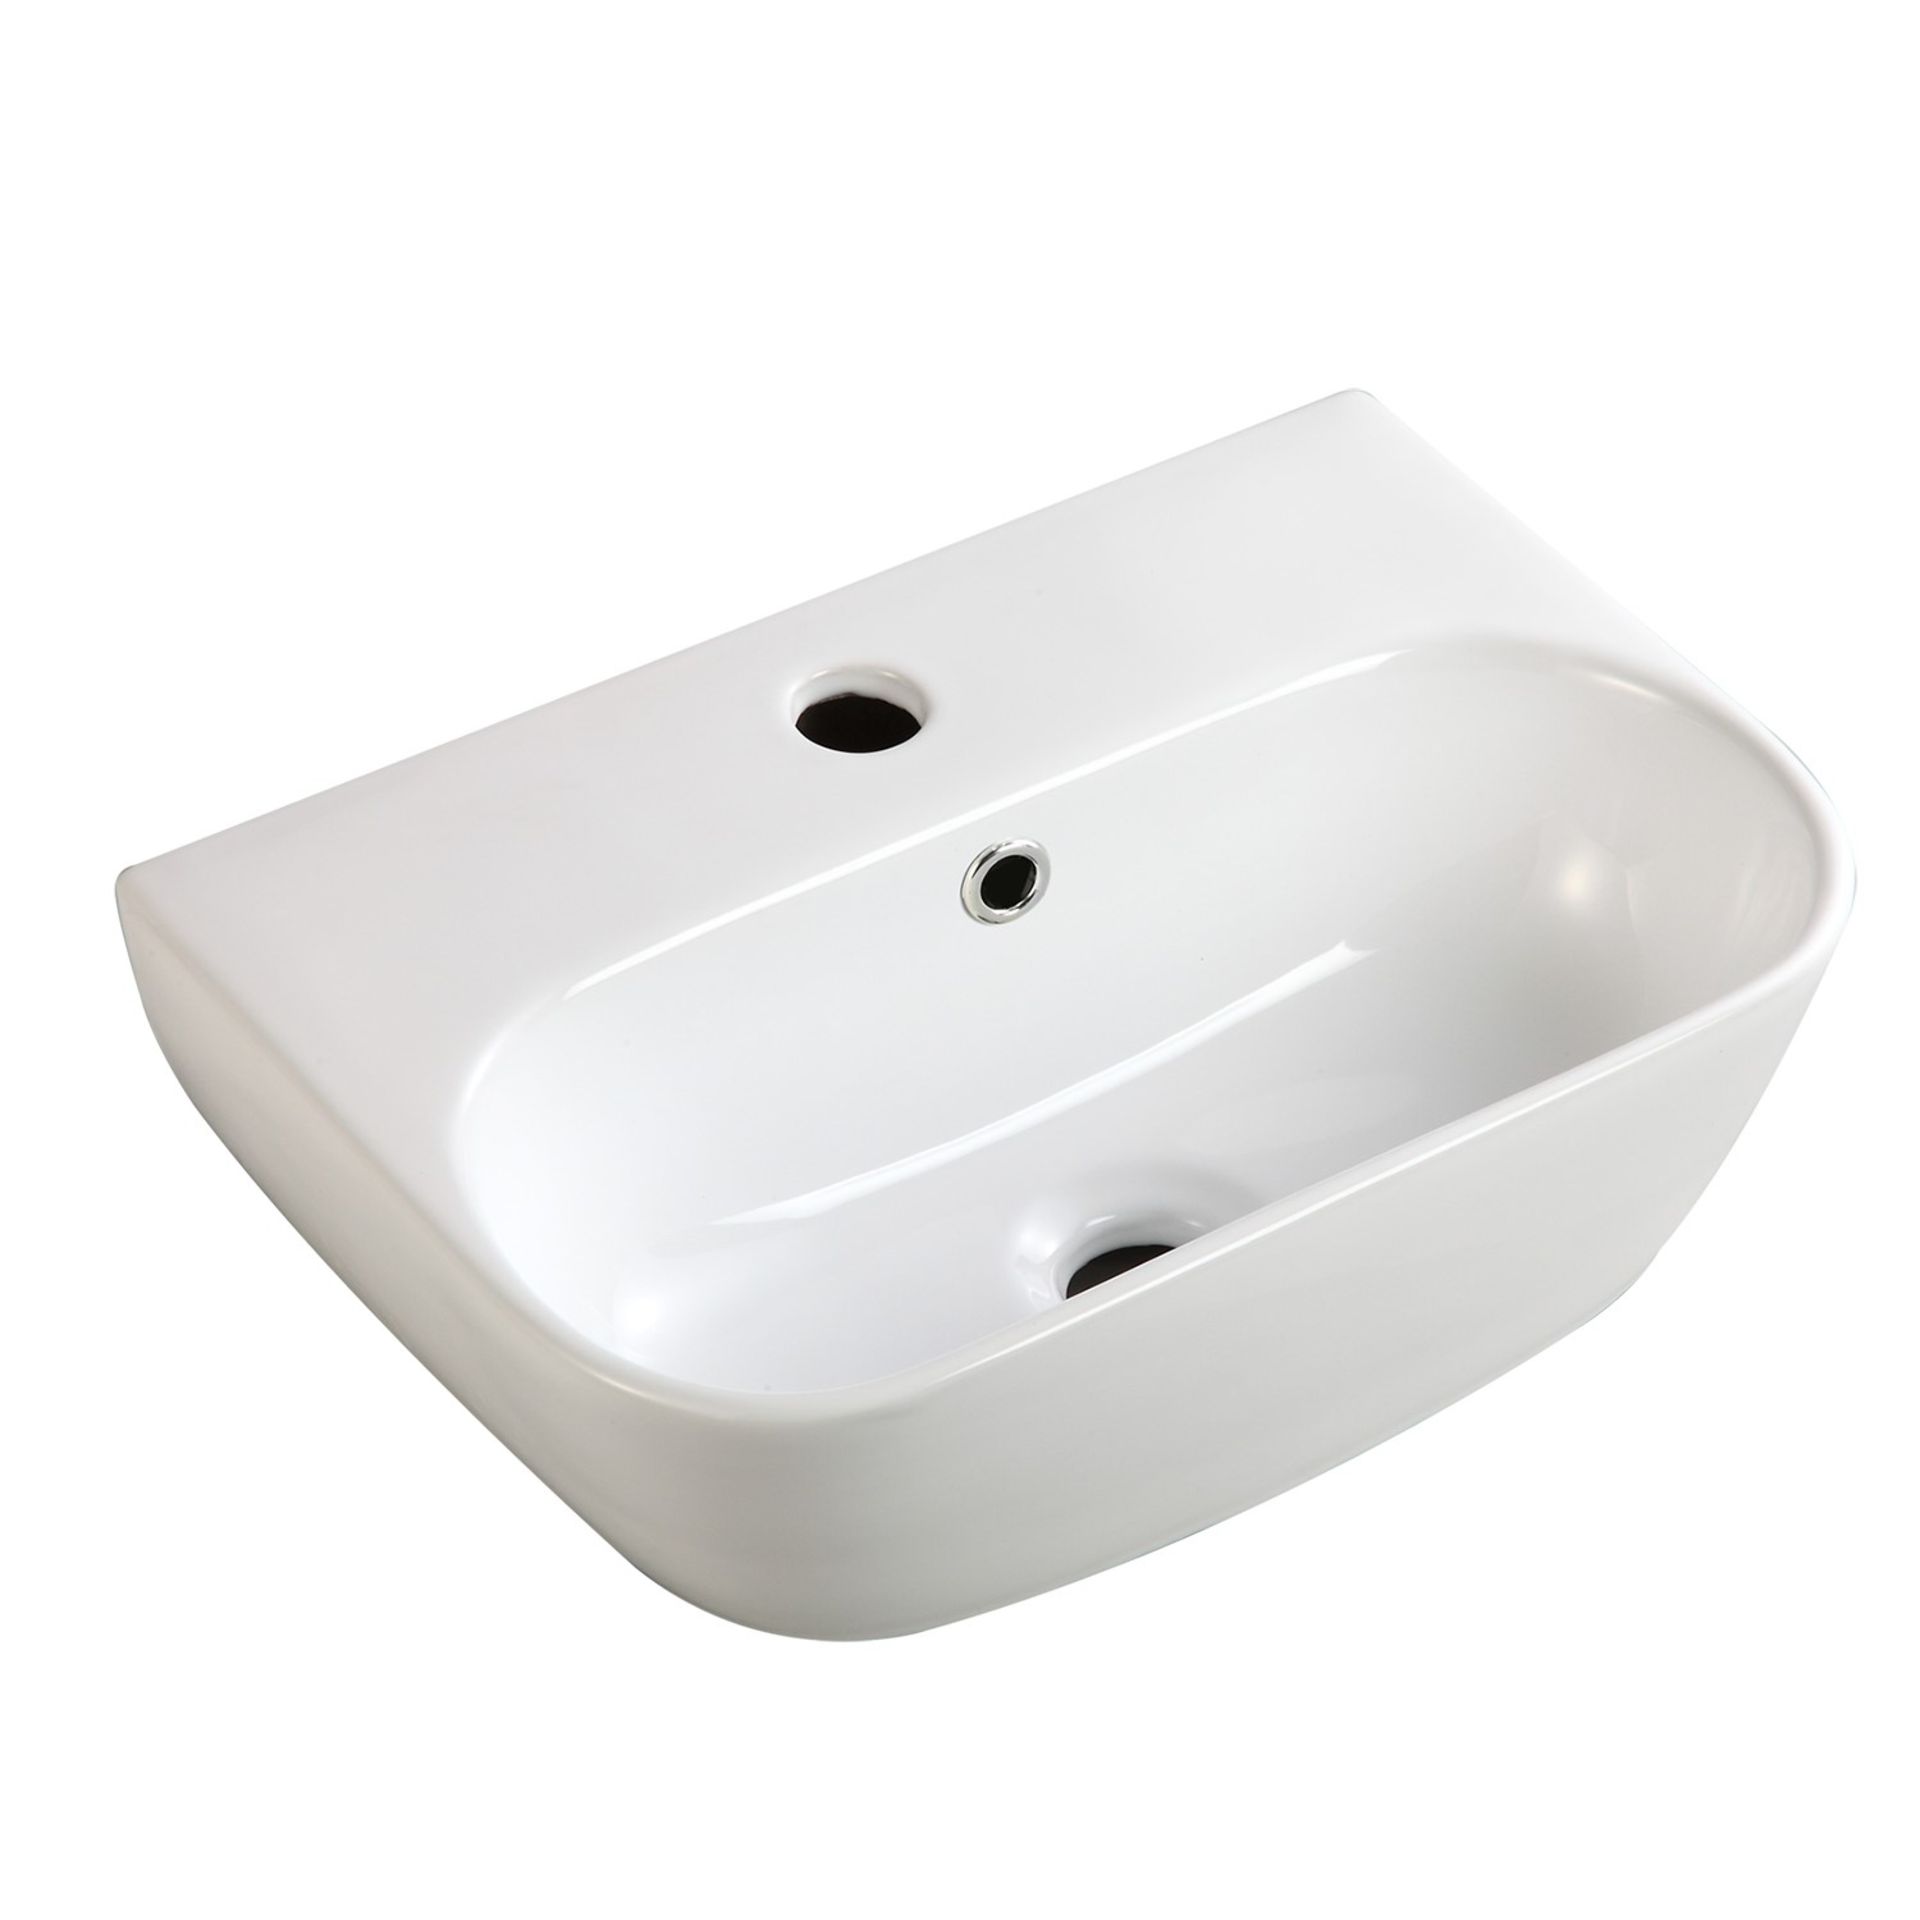 Virtuo Wall Hung Cloakroom Basin. - BI. The Virtuo 1 tap hole wall hung basin. This basin is a